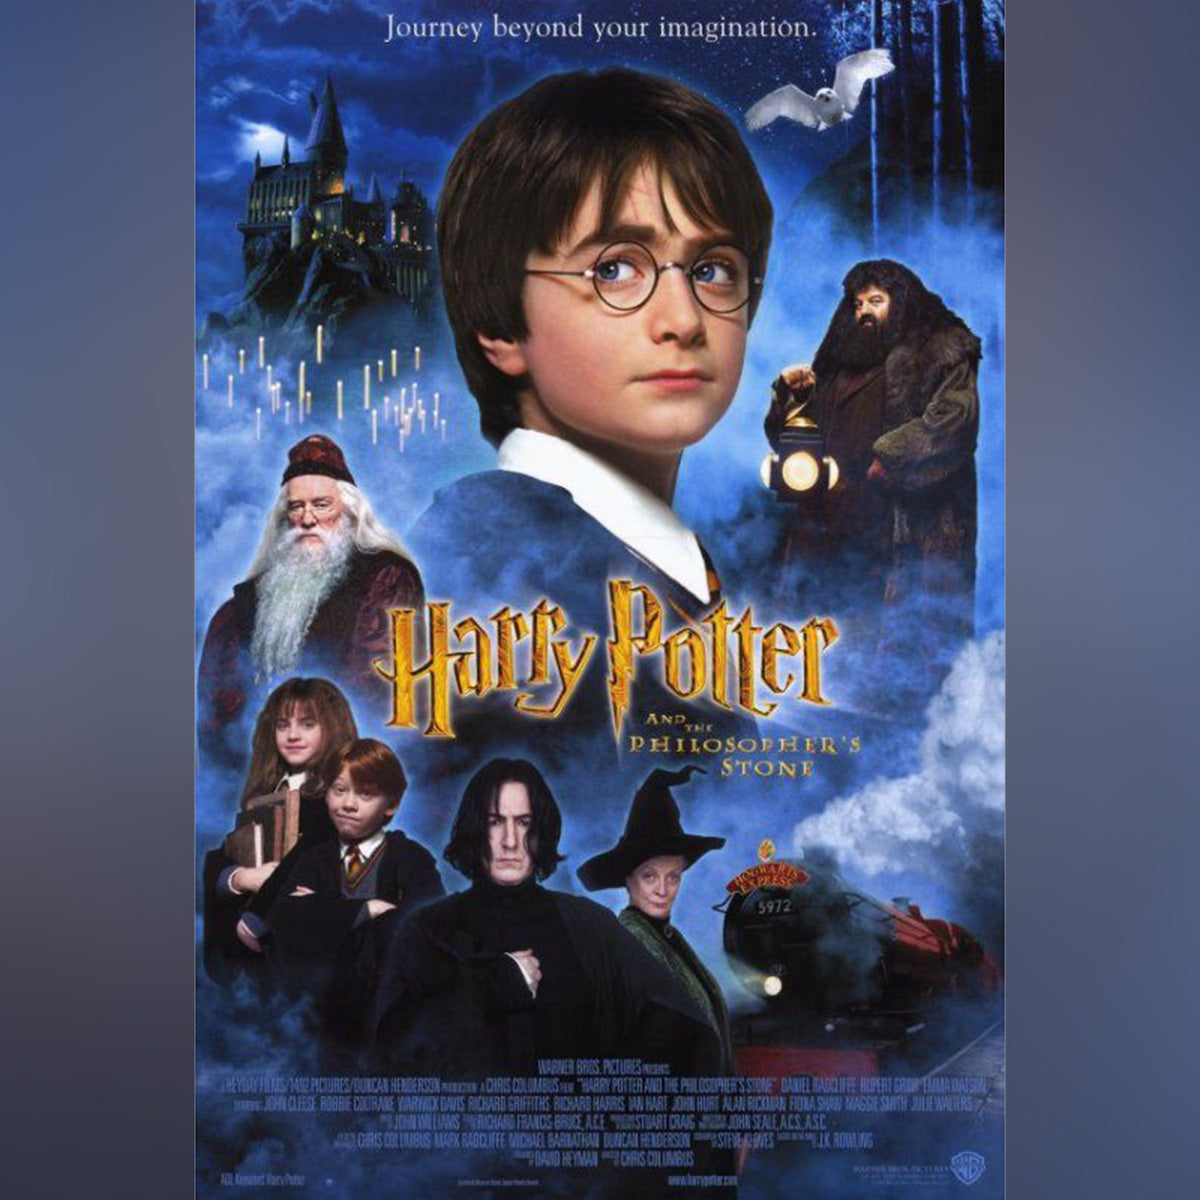 Original Movie Poster of Harry Potter And The Sorcerer's Stone (2001)